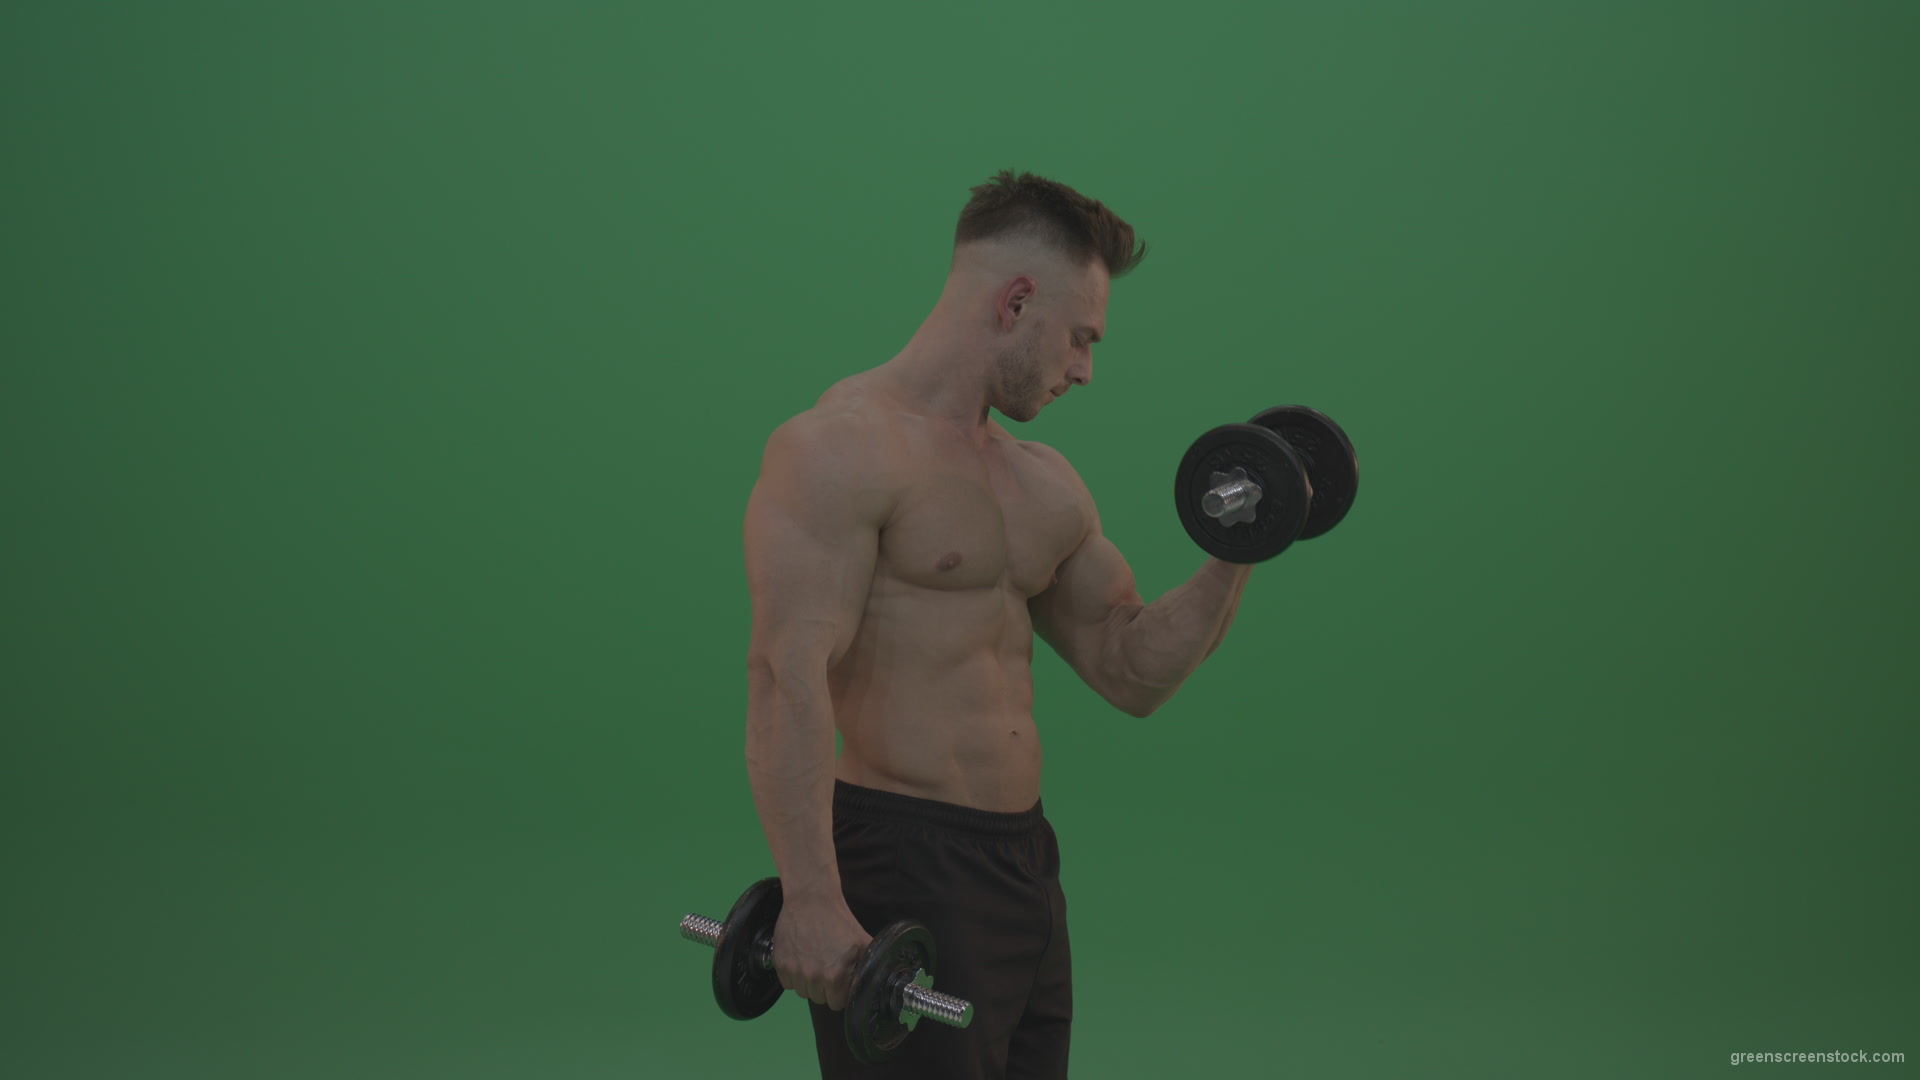 Young_Bodybuilder_Working_Out_Two_Handed_Dumbbell_Push_Ups_Excercise_On_Green_Screen_Wall_Background_008 Green Screen Stock